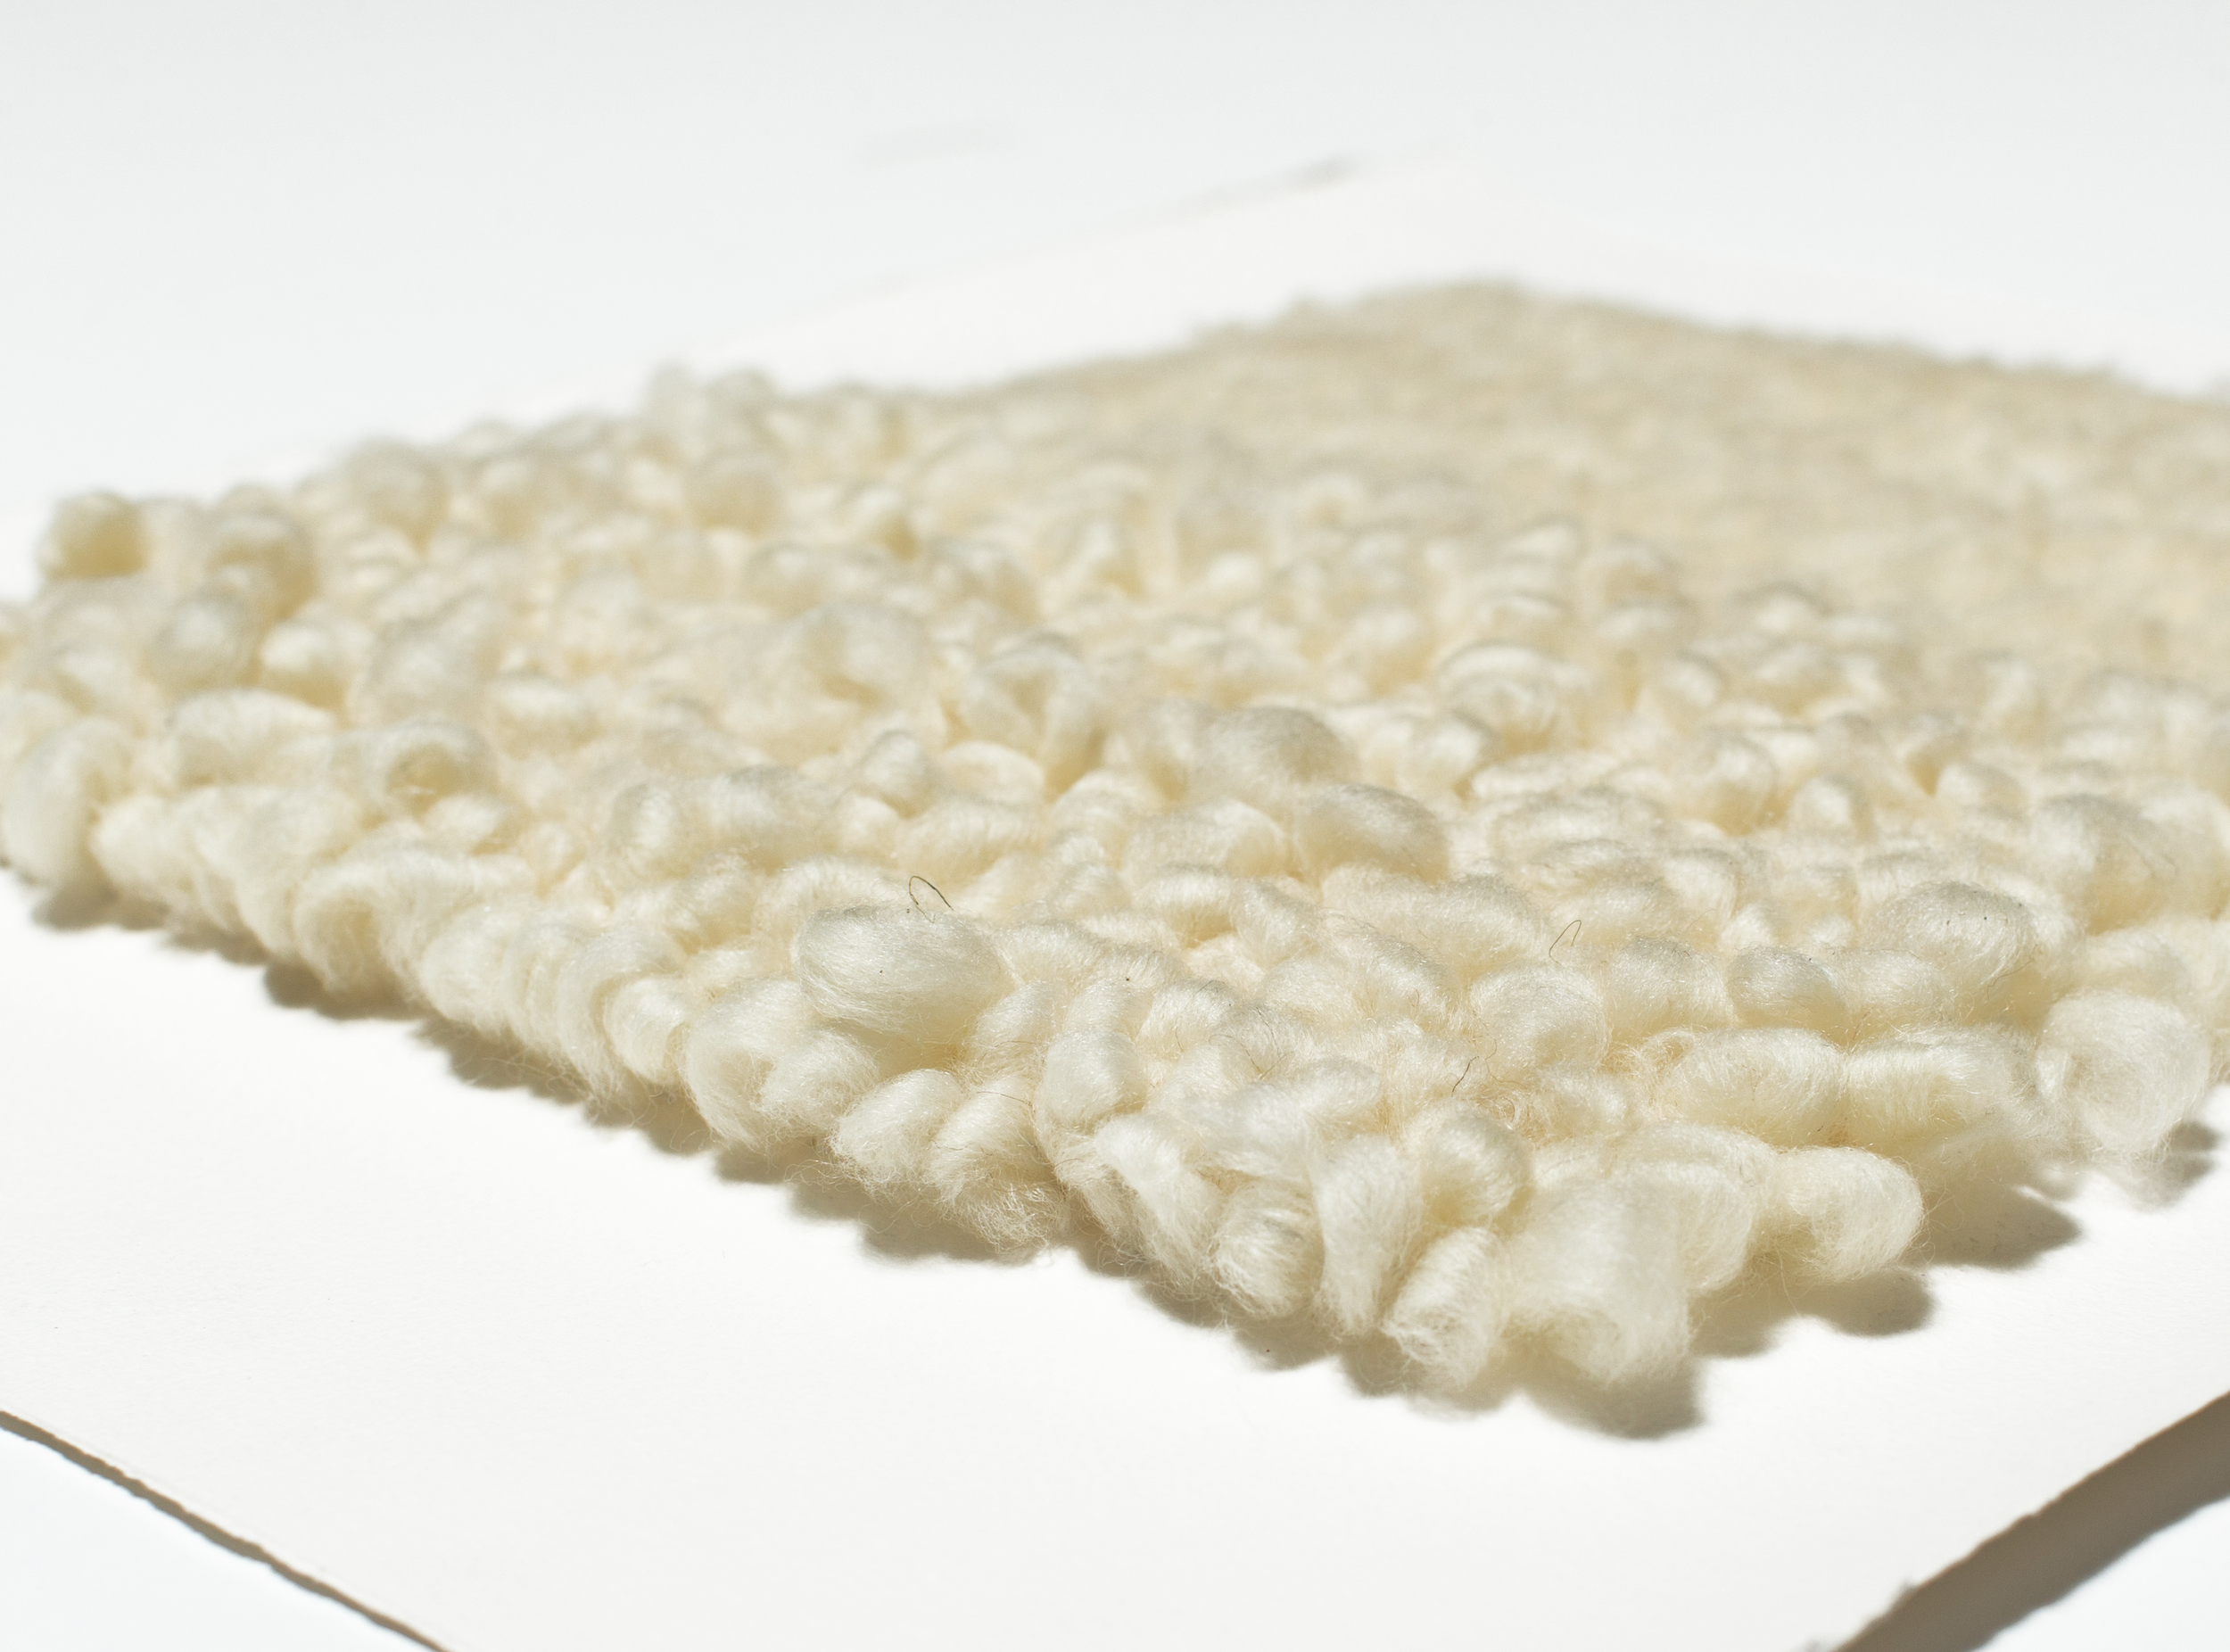  Tufting is a technique traditionally used through open weave fabric for rug making. These 3 dimensional wall pieces are created using the same tufting form through cotton paper.  yarn : wool roving 